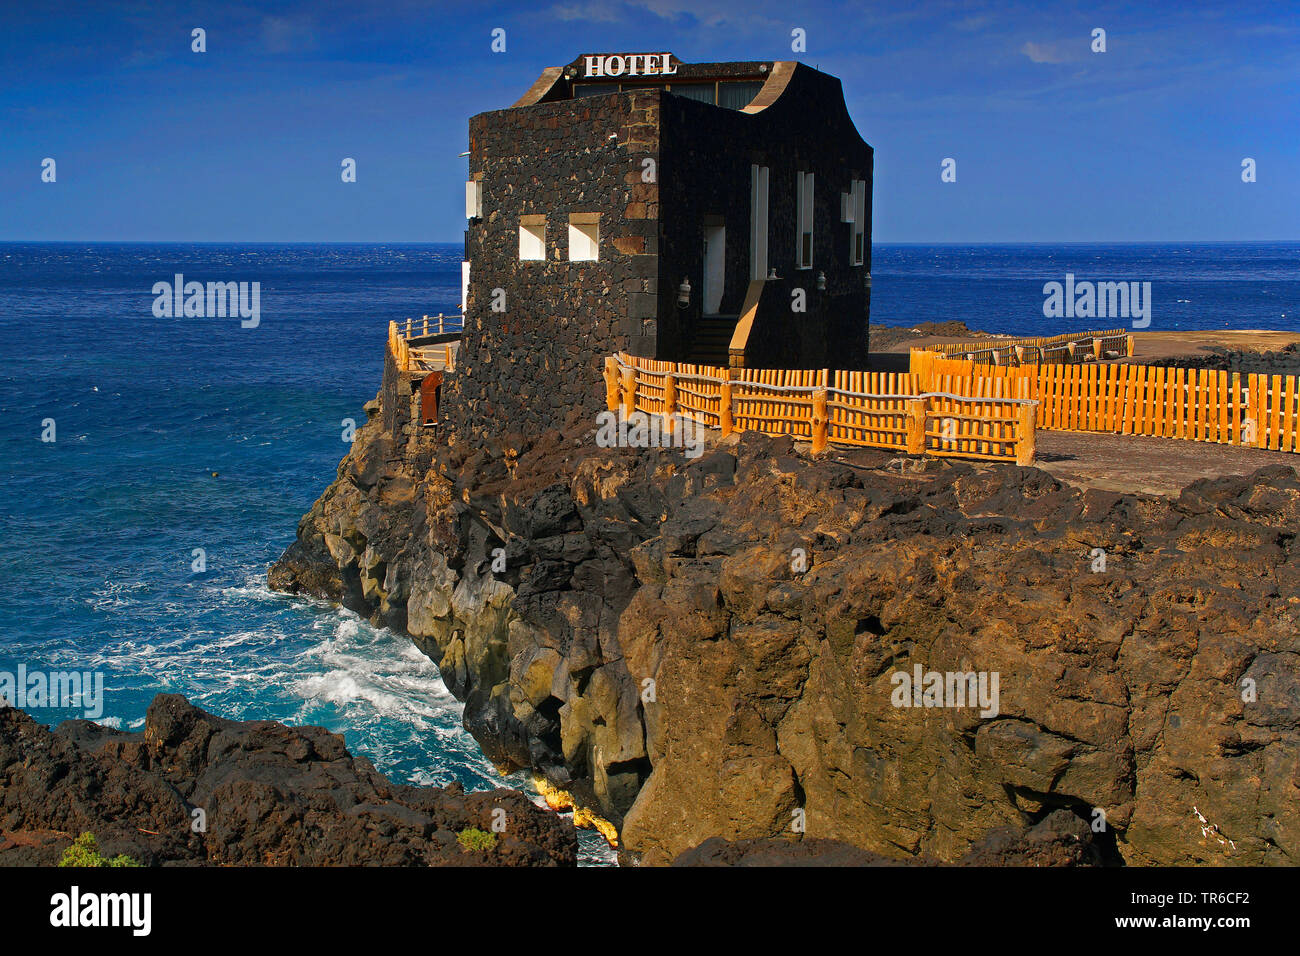 Punta Grande, one of the smallest hotels in the world, Canary Islands, El Hierro Stock Photo